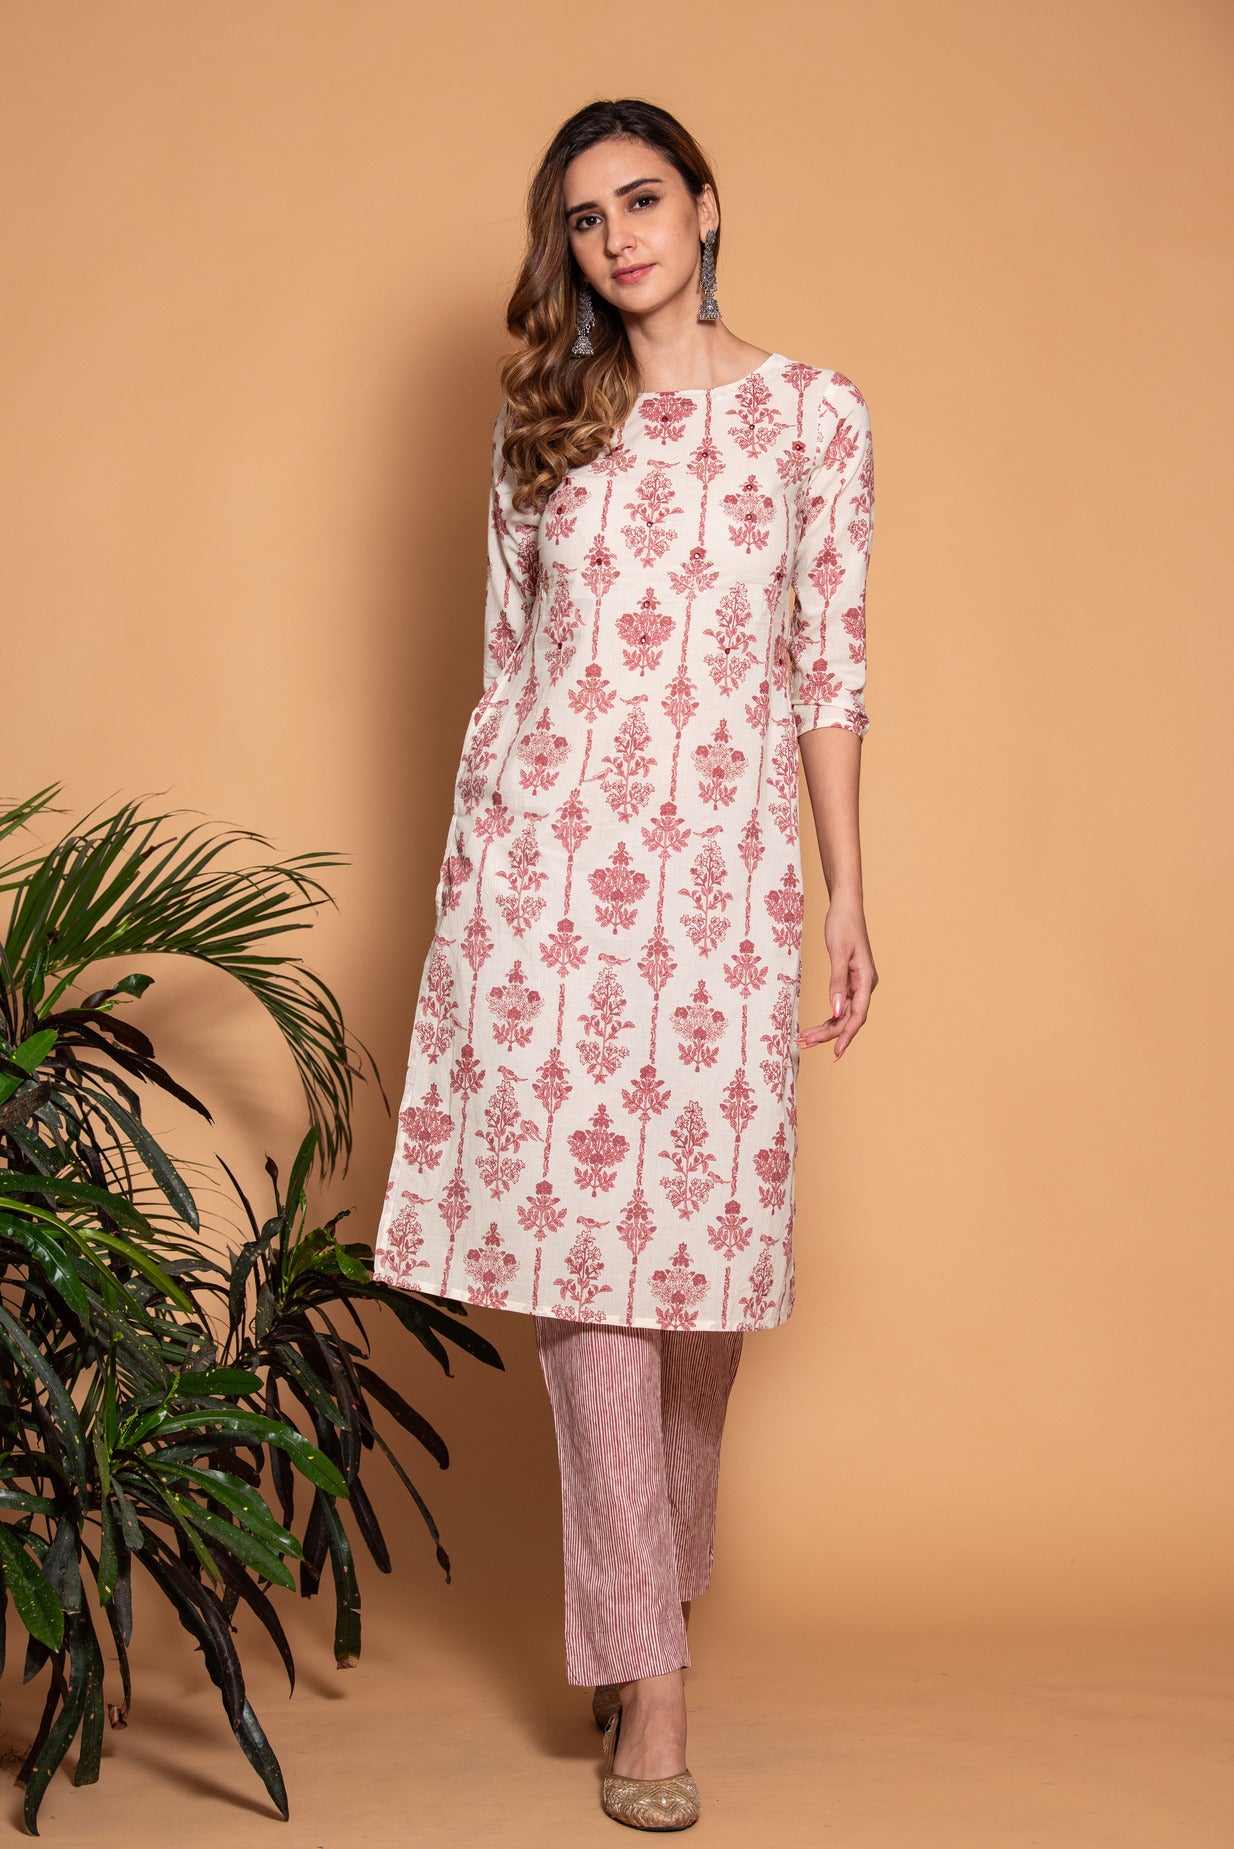 Off-White with Maroon Floral Printed Cotton Kurti Set